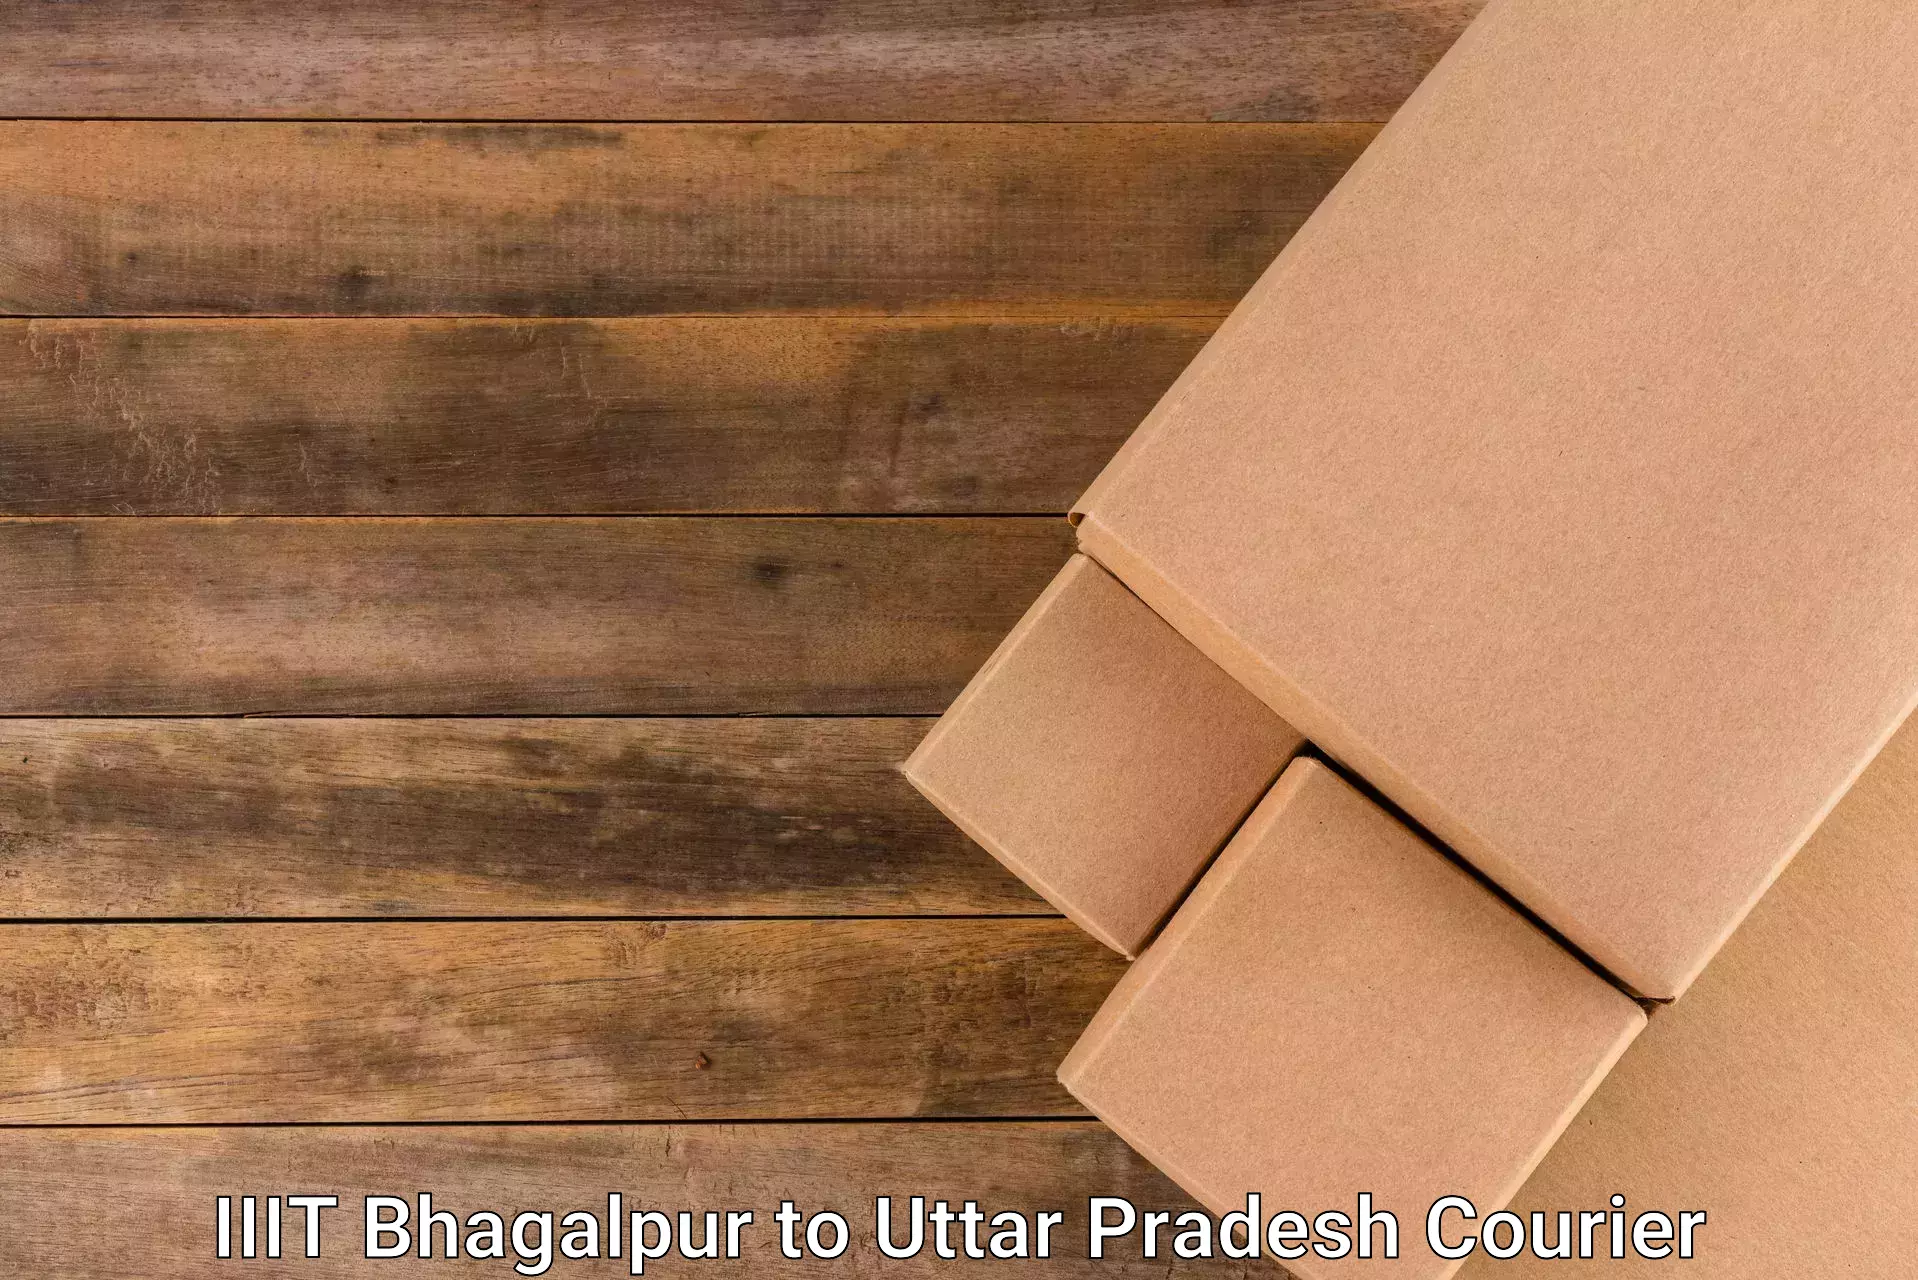 Round-the-clock parcel delivery IIIT Bhagalpur to Dibai